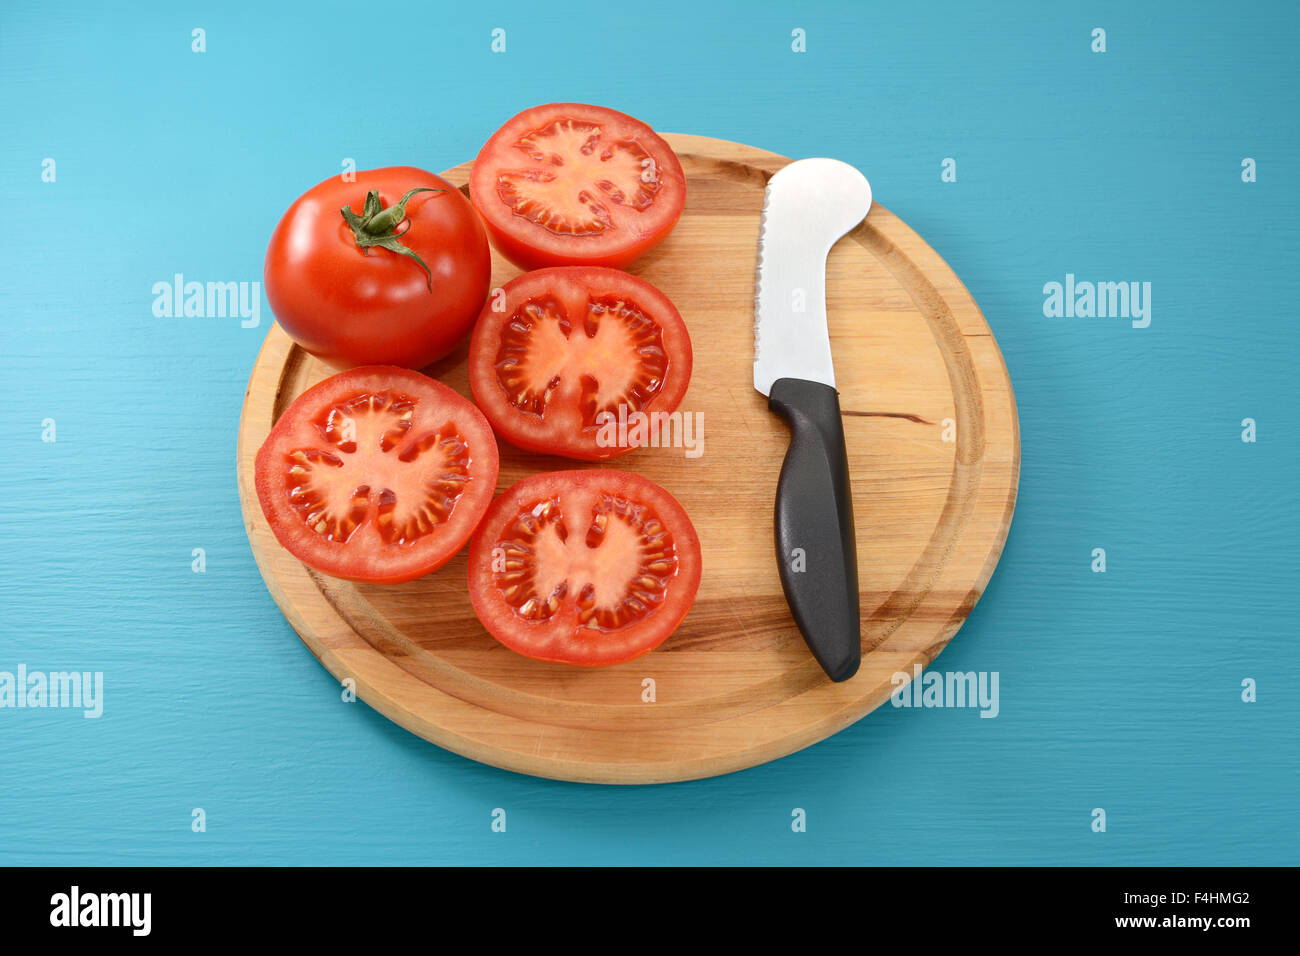 Whole tomato and four cut halves with a tomato knife on a wooden cutting board Stock Photo